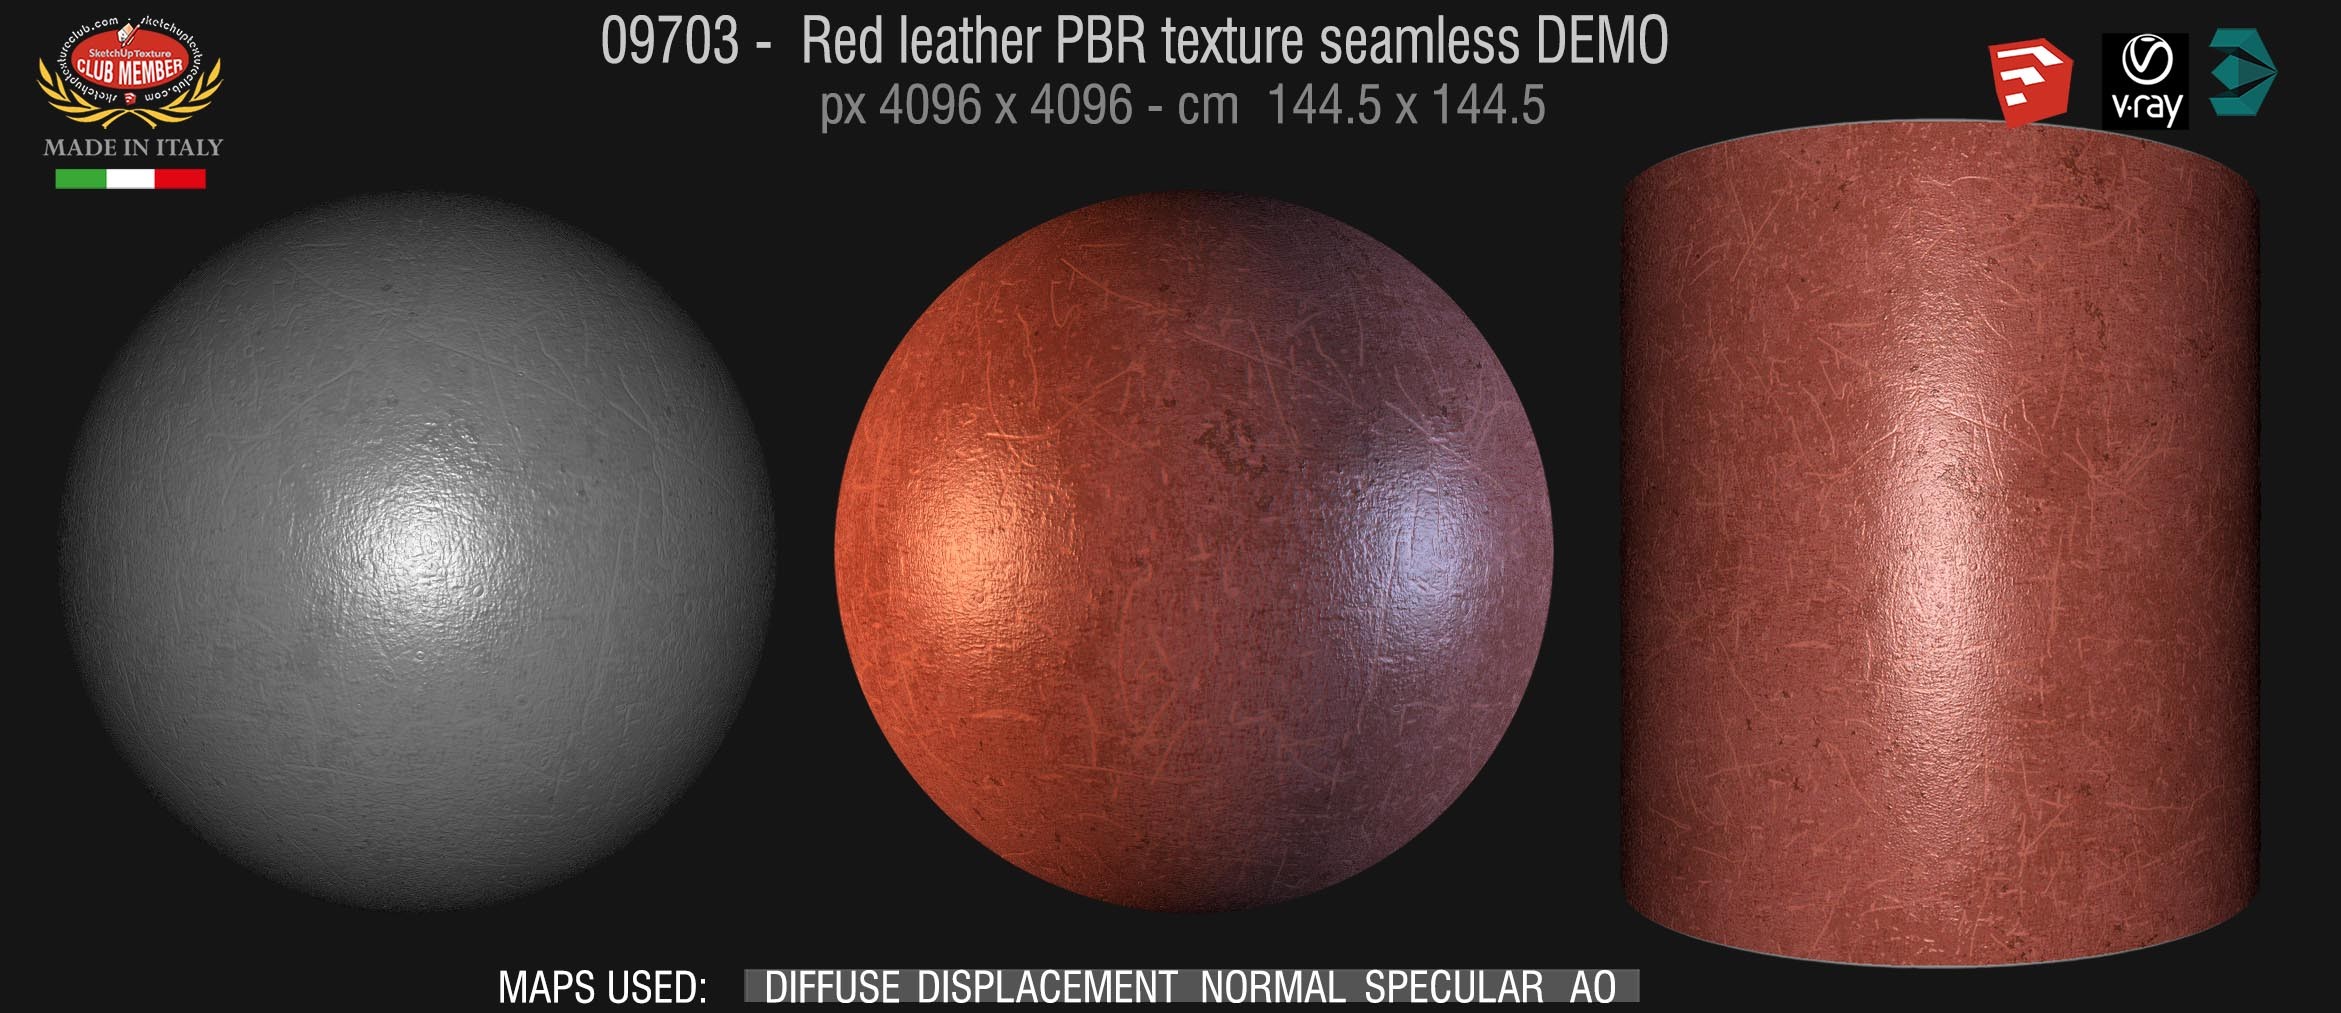 09703 Red leather PBR texture seamless DEMO